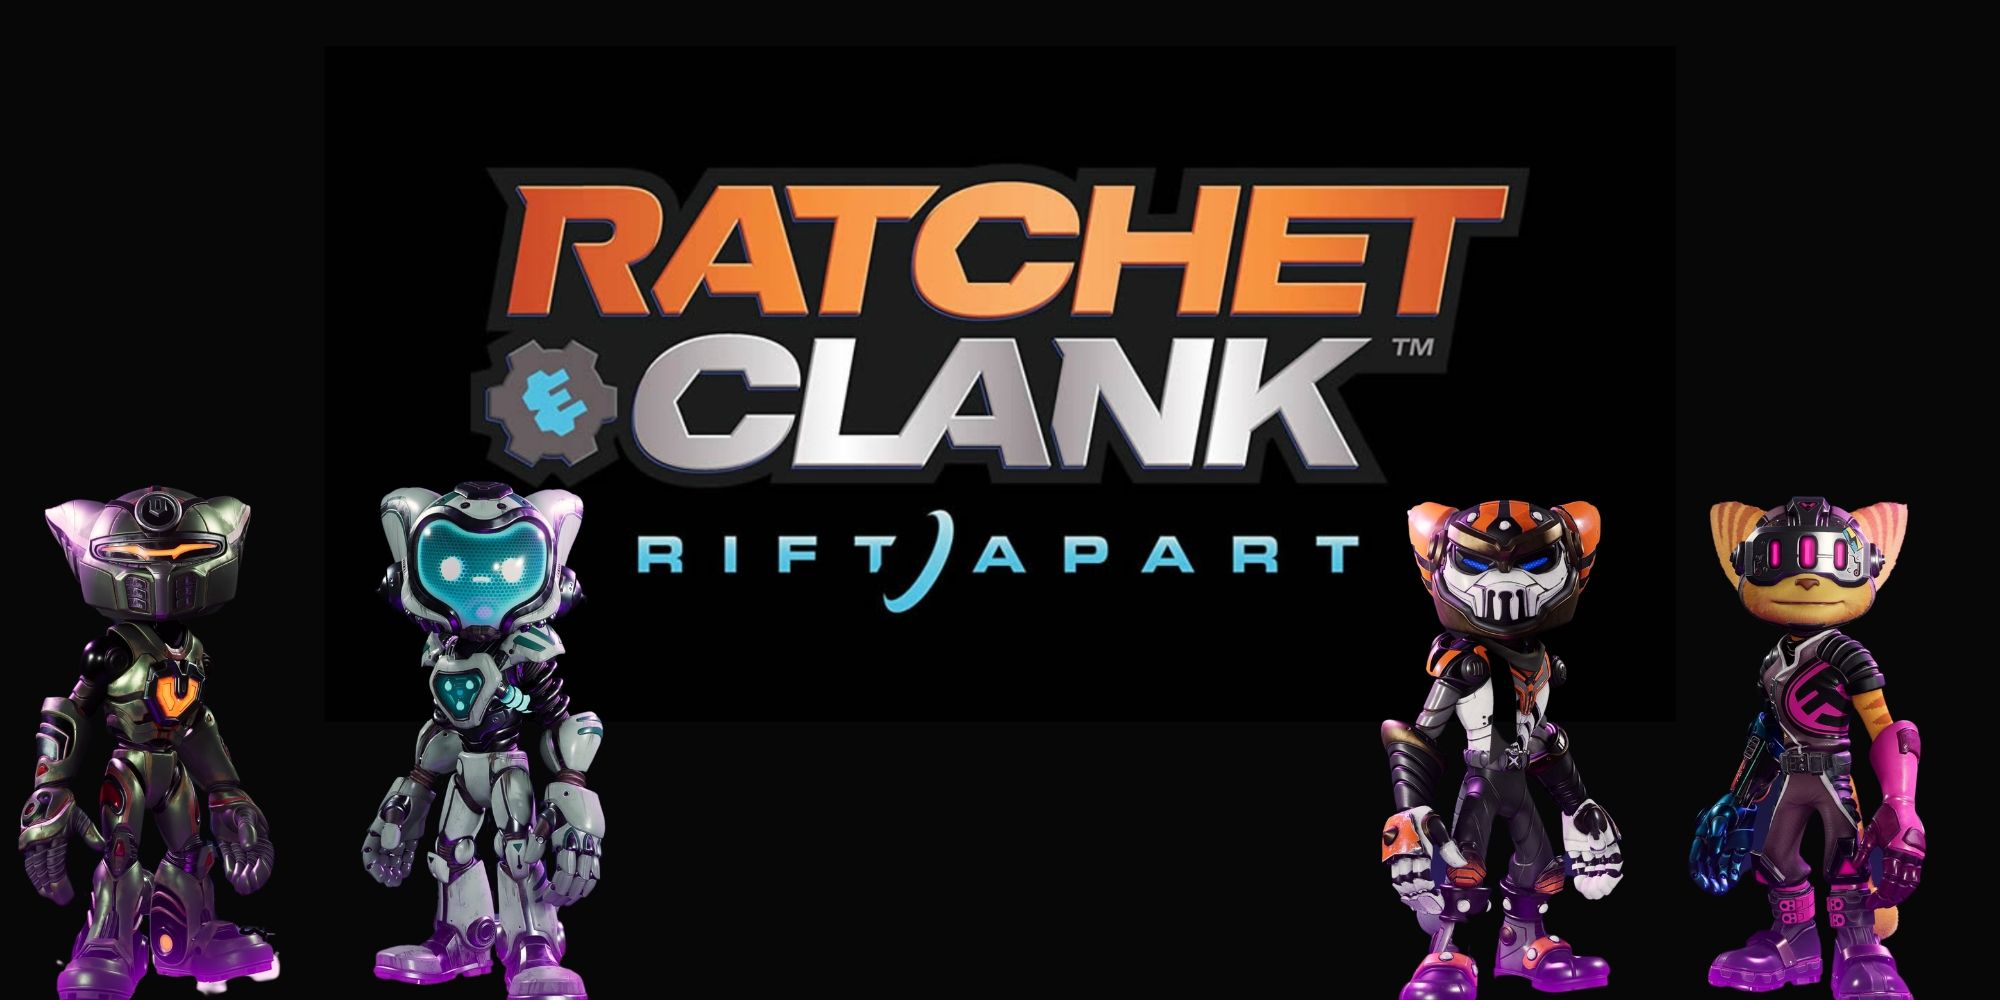 Some of the armor sets from Ratchet and Clank: Rift Apart